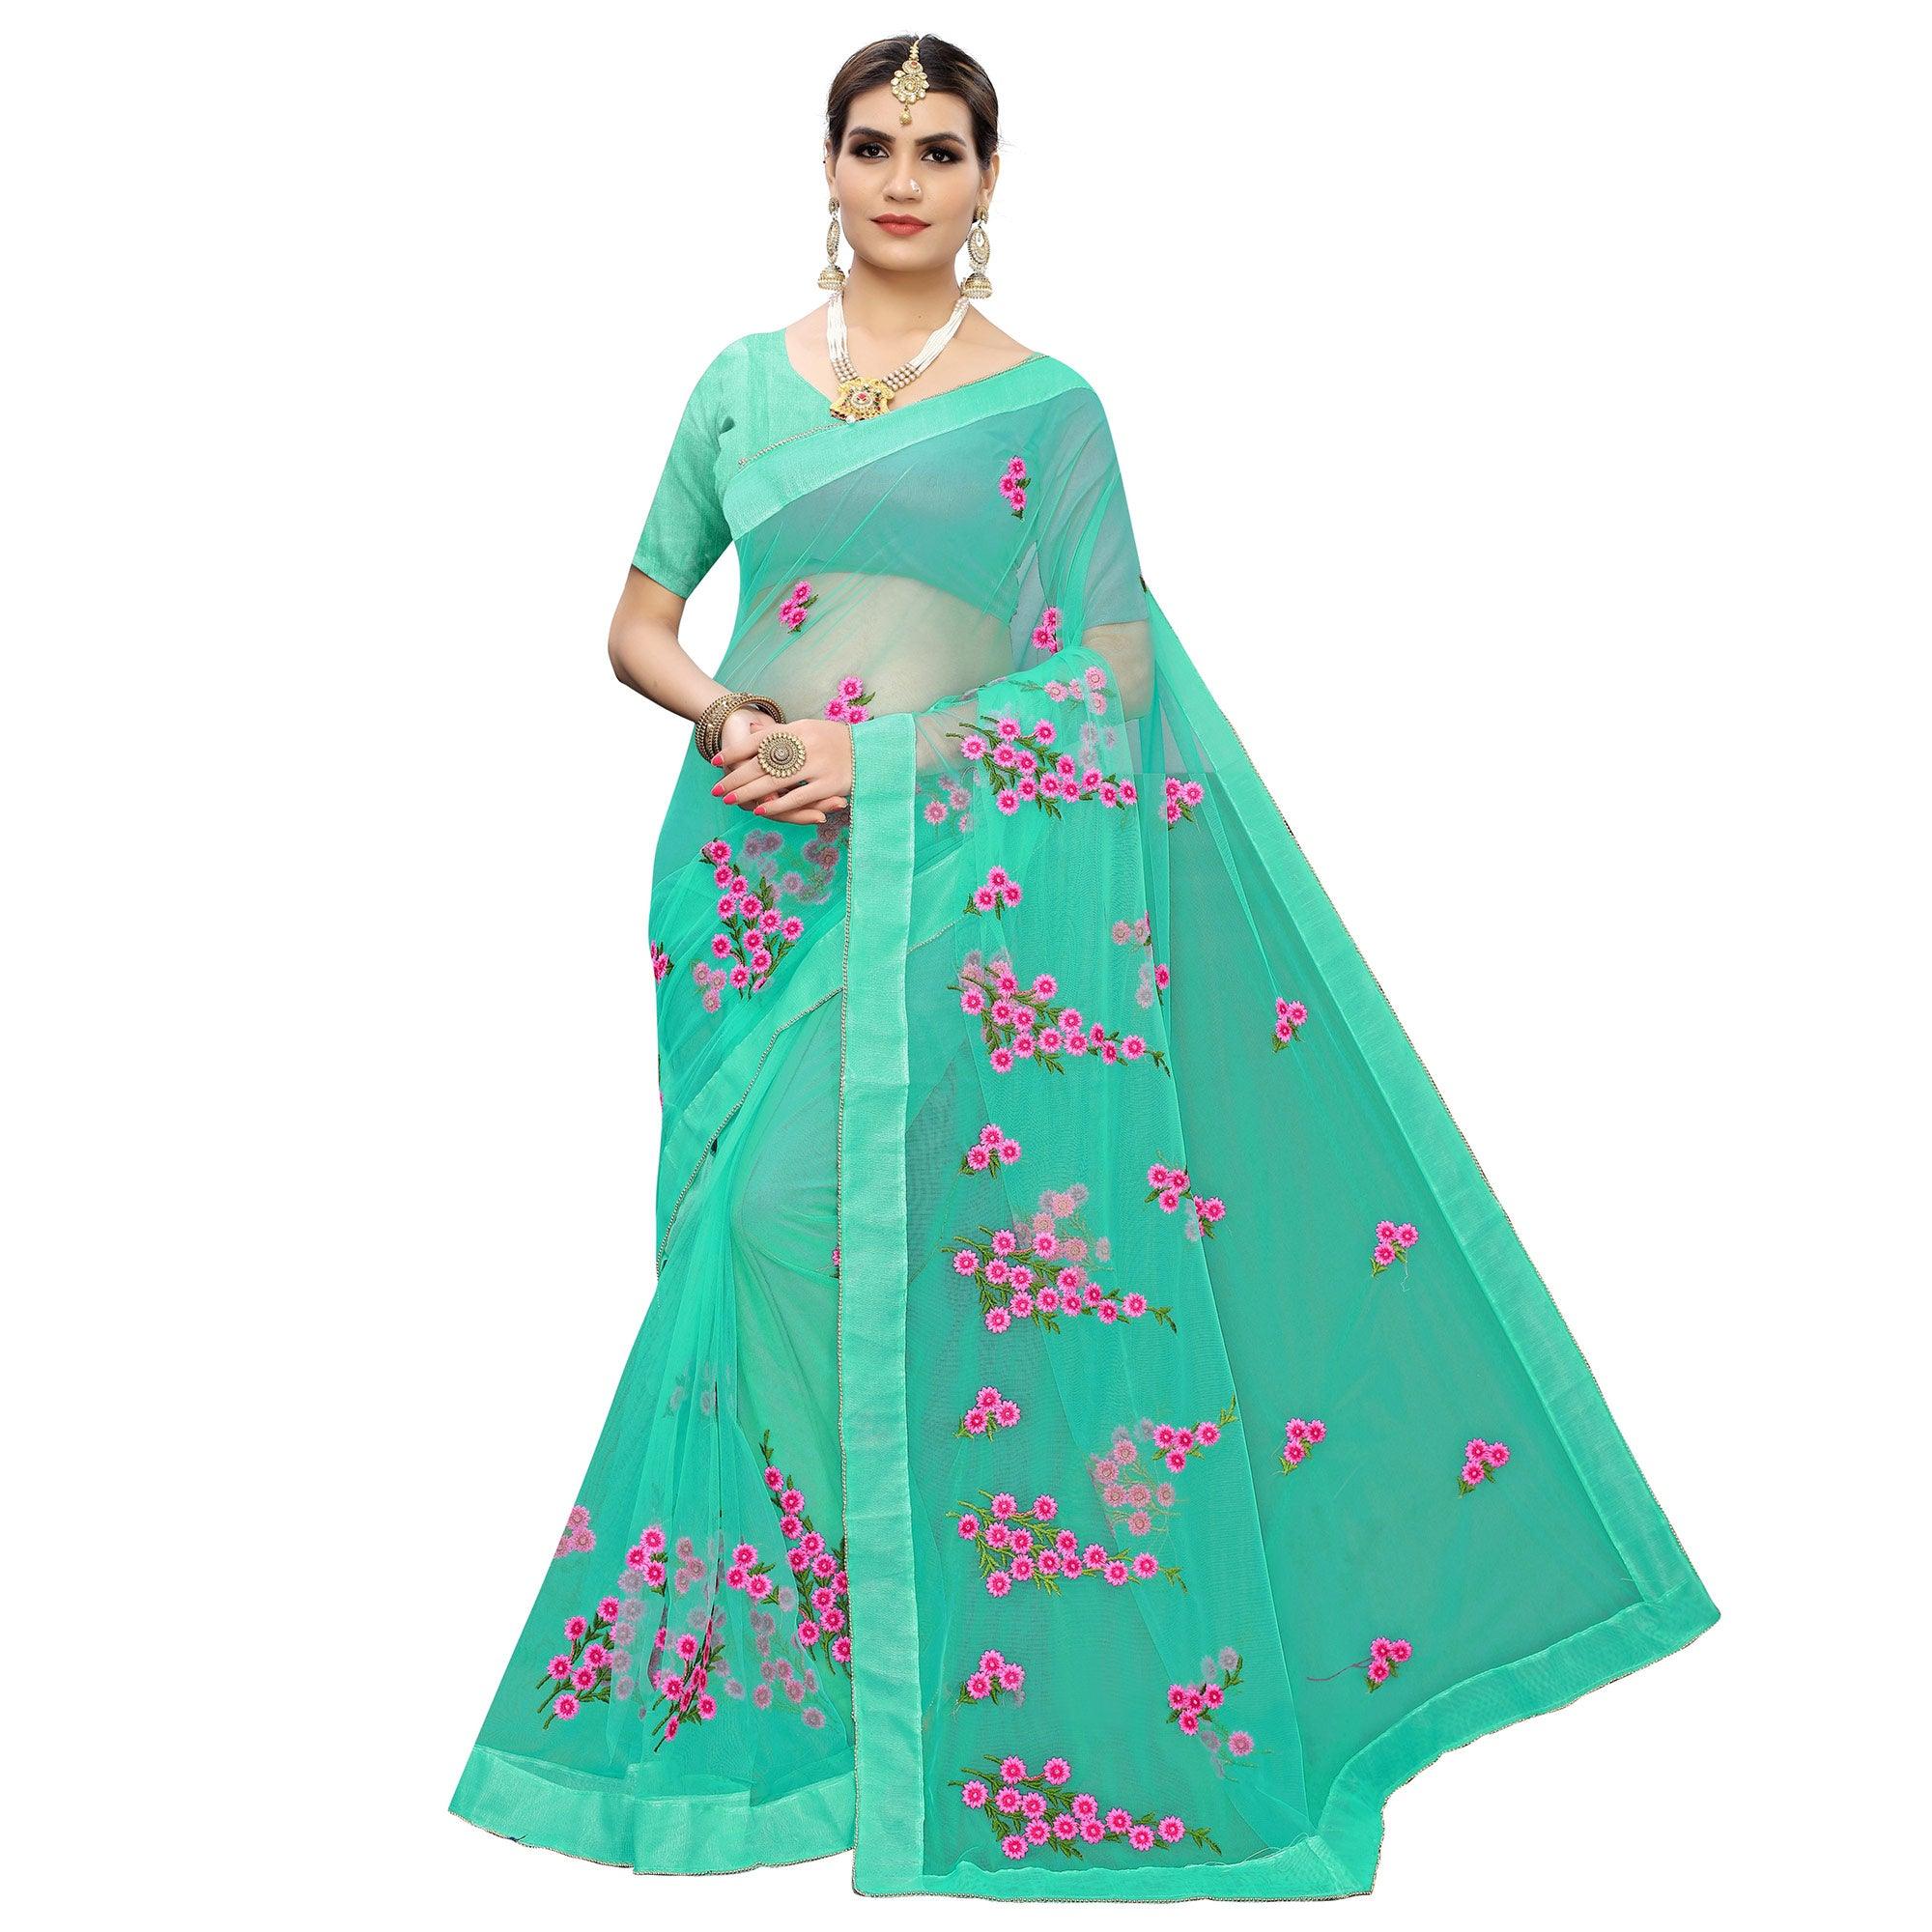 Glowing Turquoise Green Colored Embroidered Net Saree - Peachmode